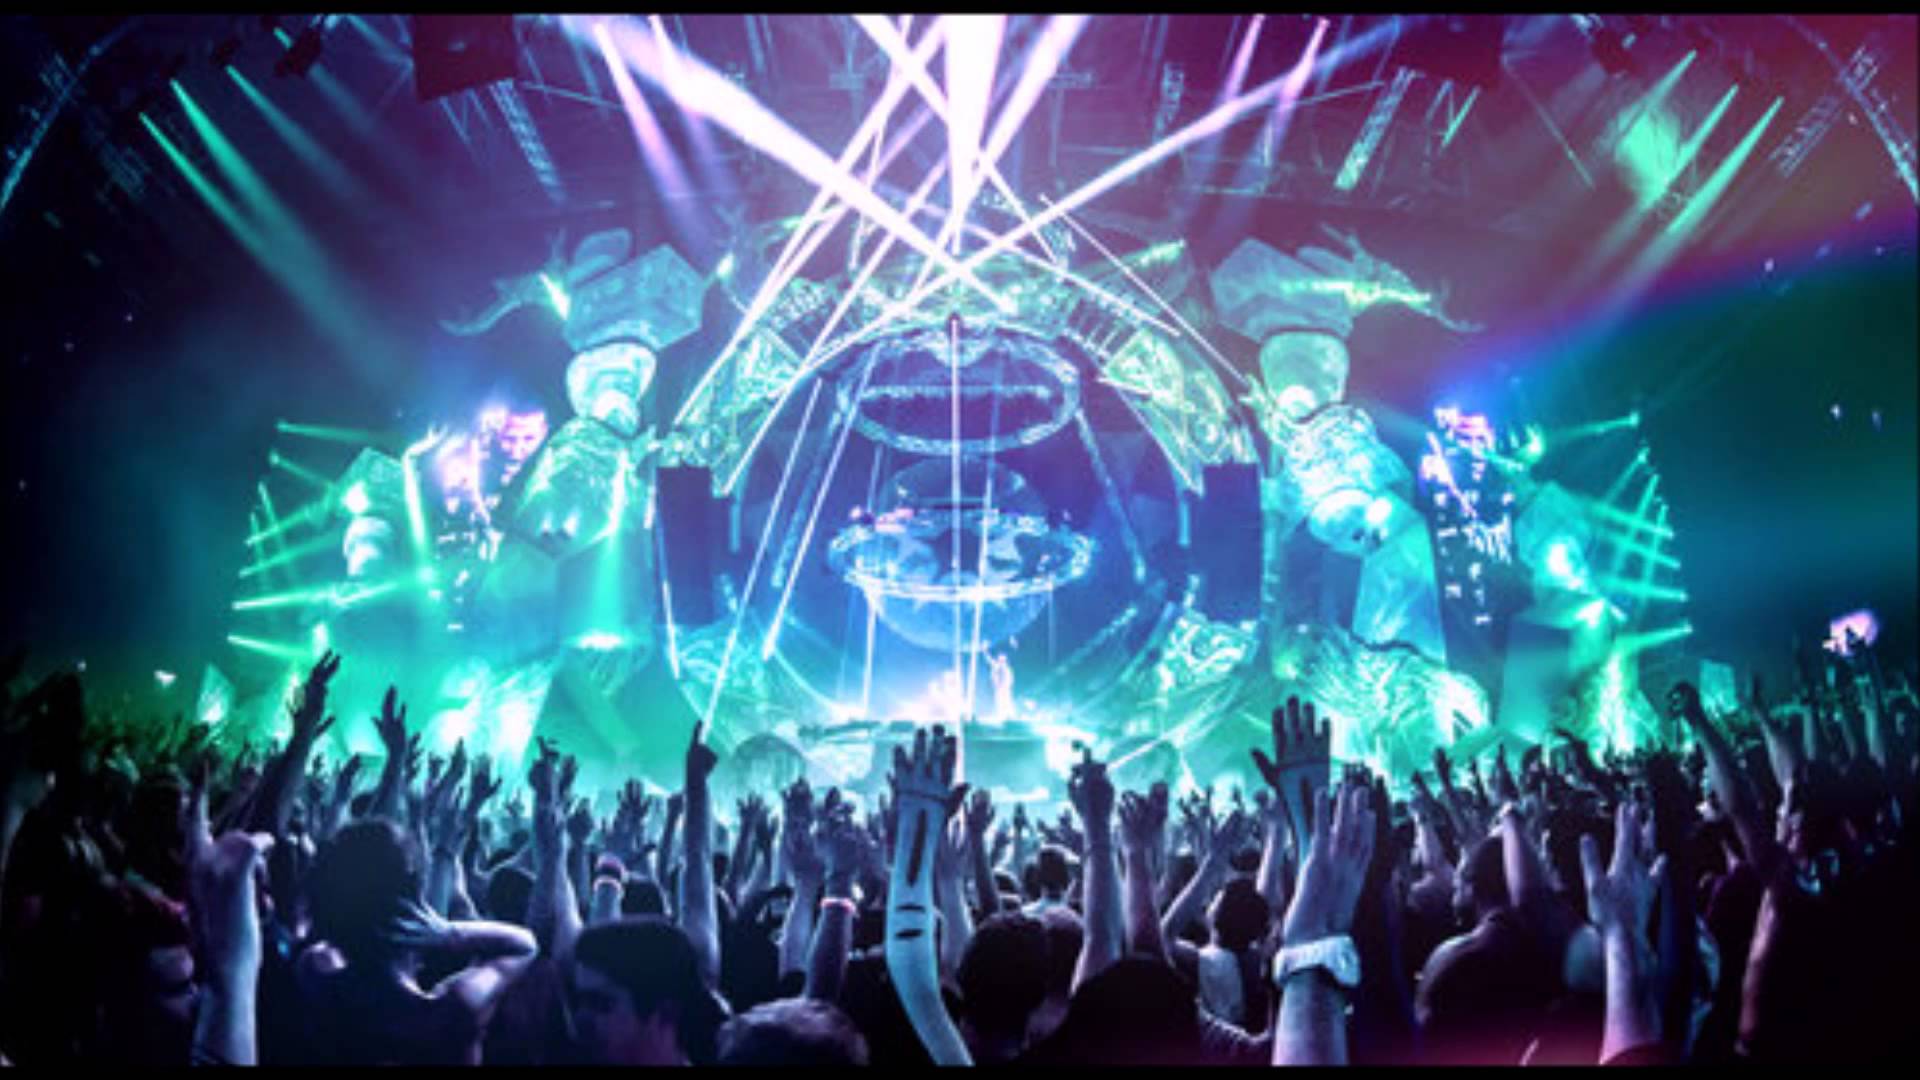 Nice Images Collection: Rave Desktop Wallpapers